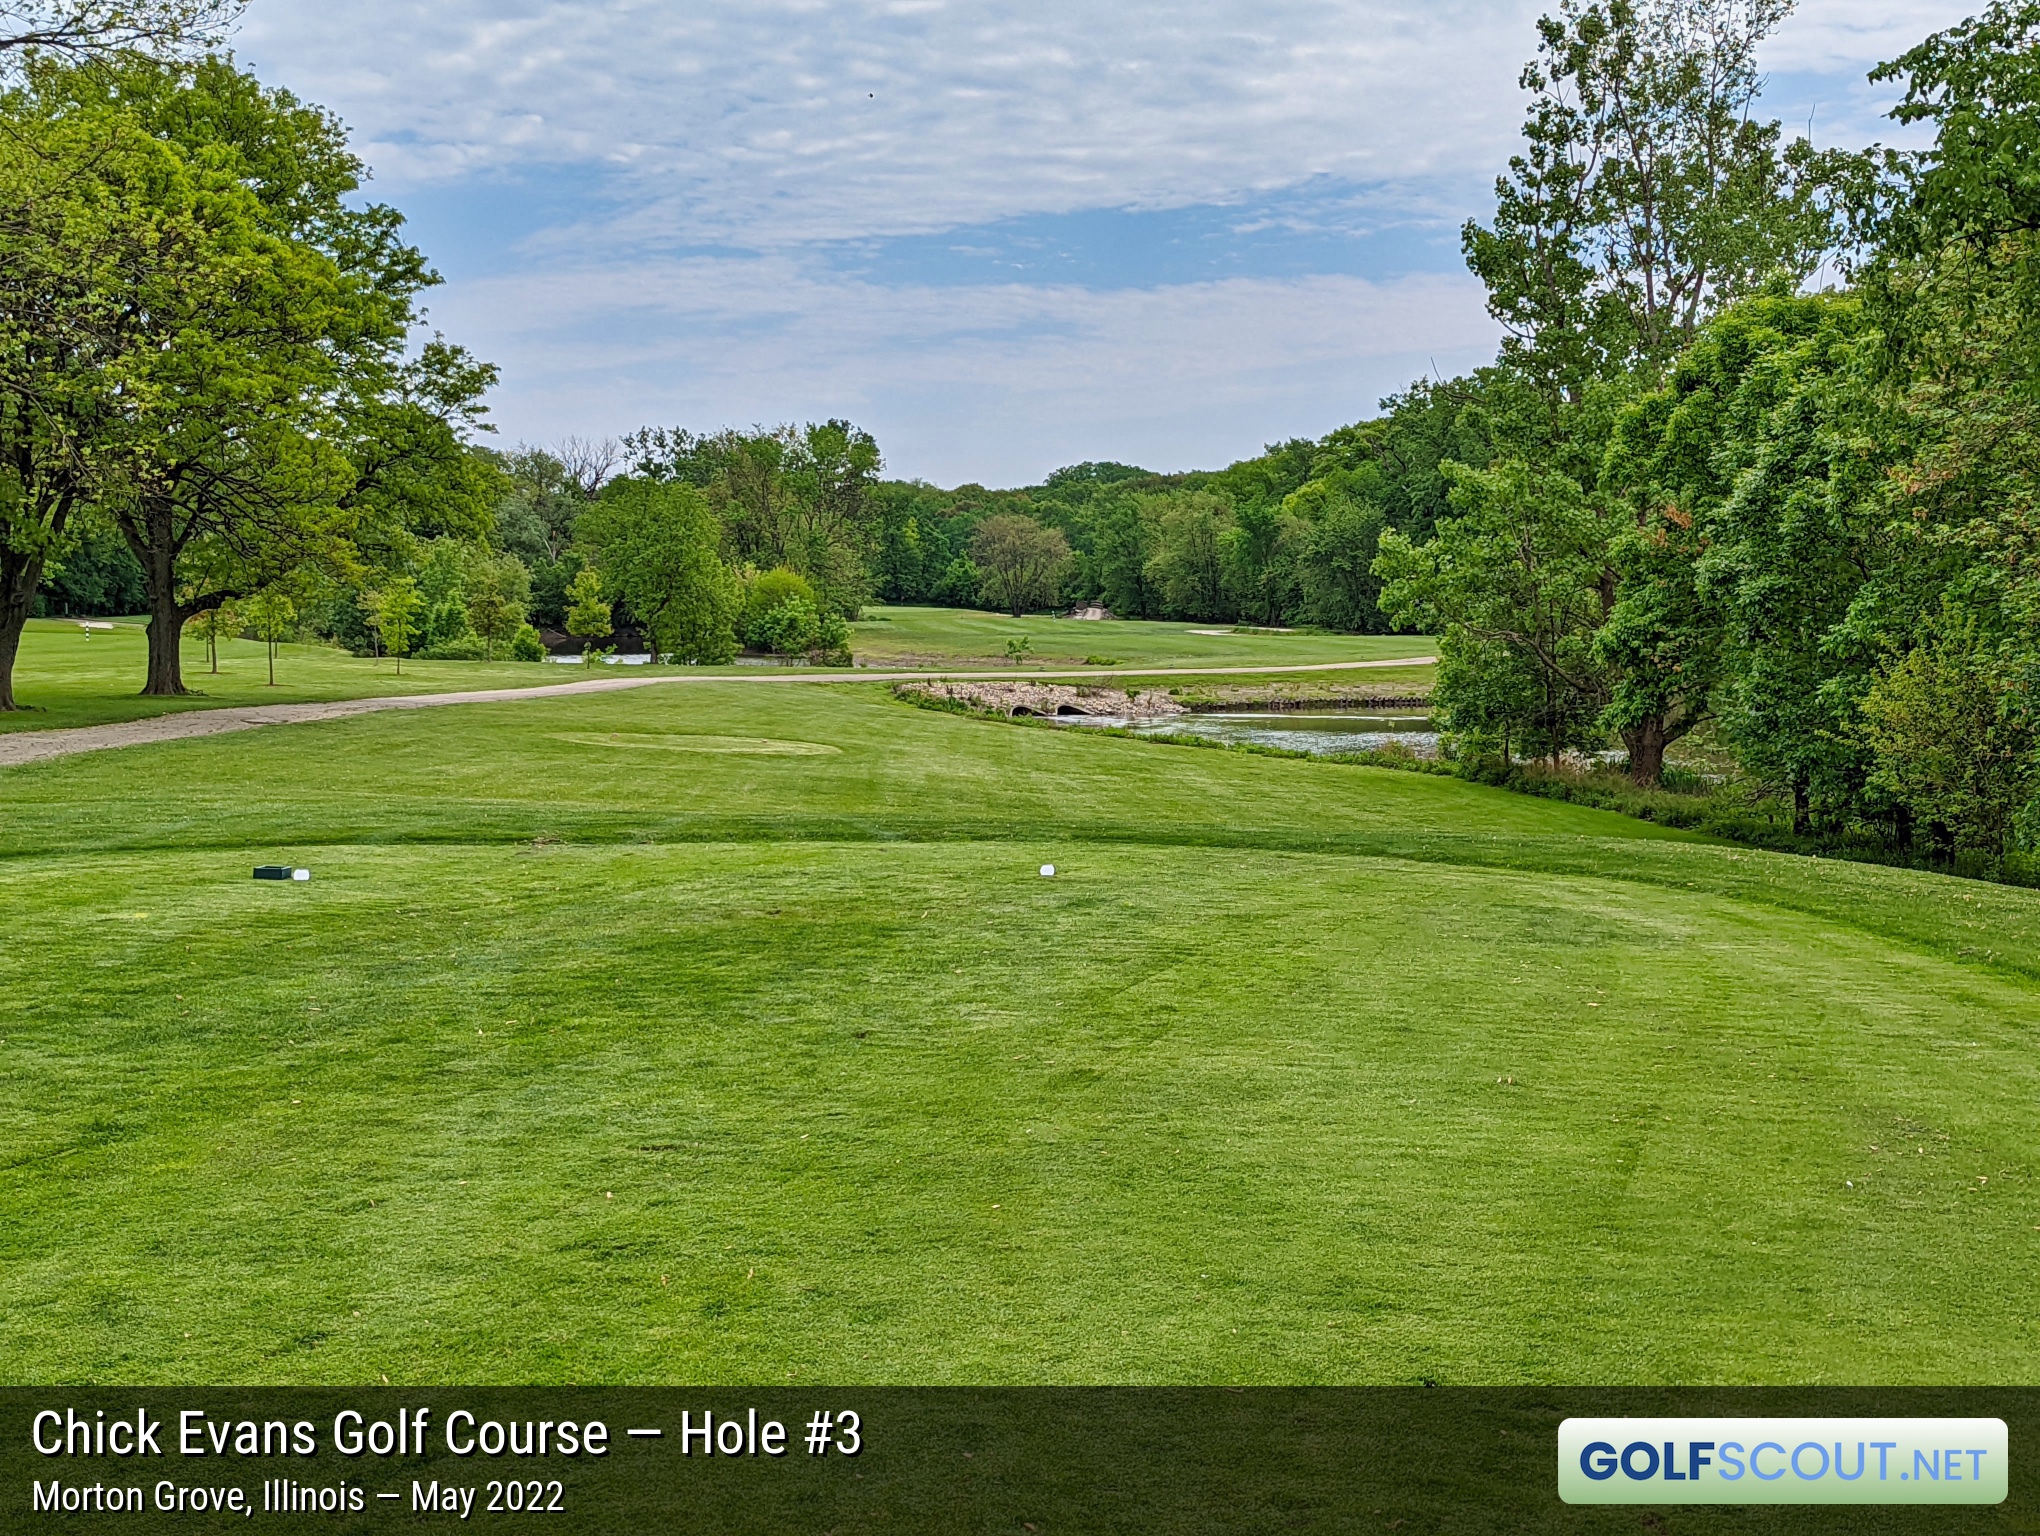 Photo of hole #3 at Chick Evans Golf Course in Morton Grove, Illinois. 